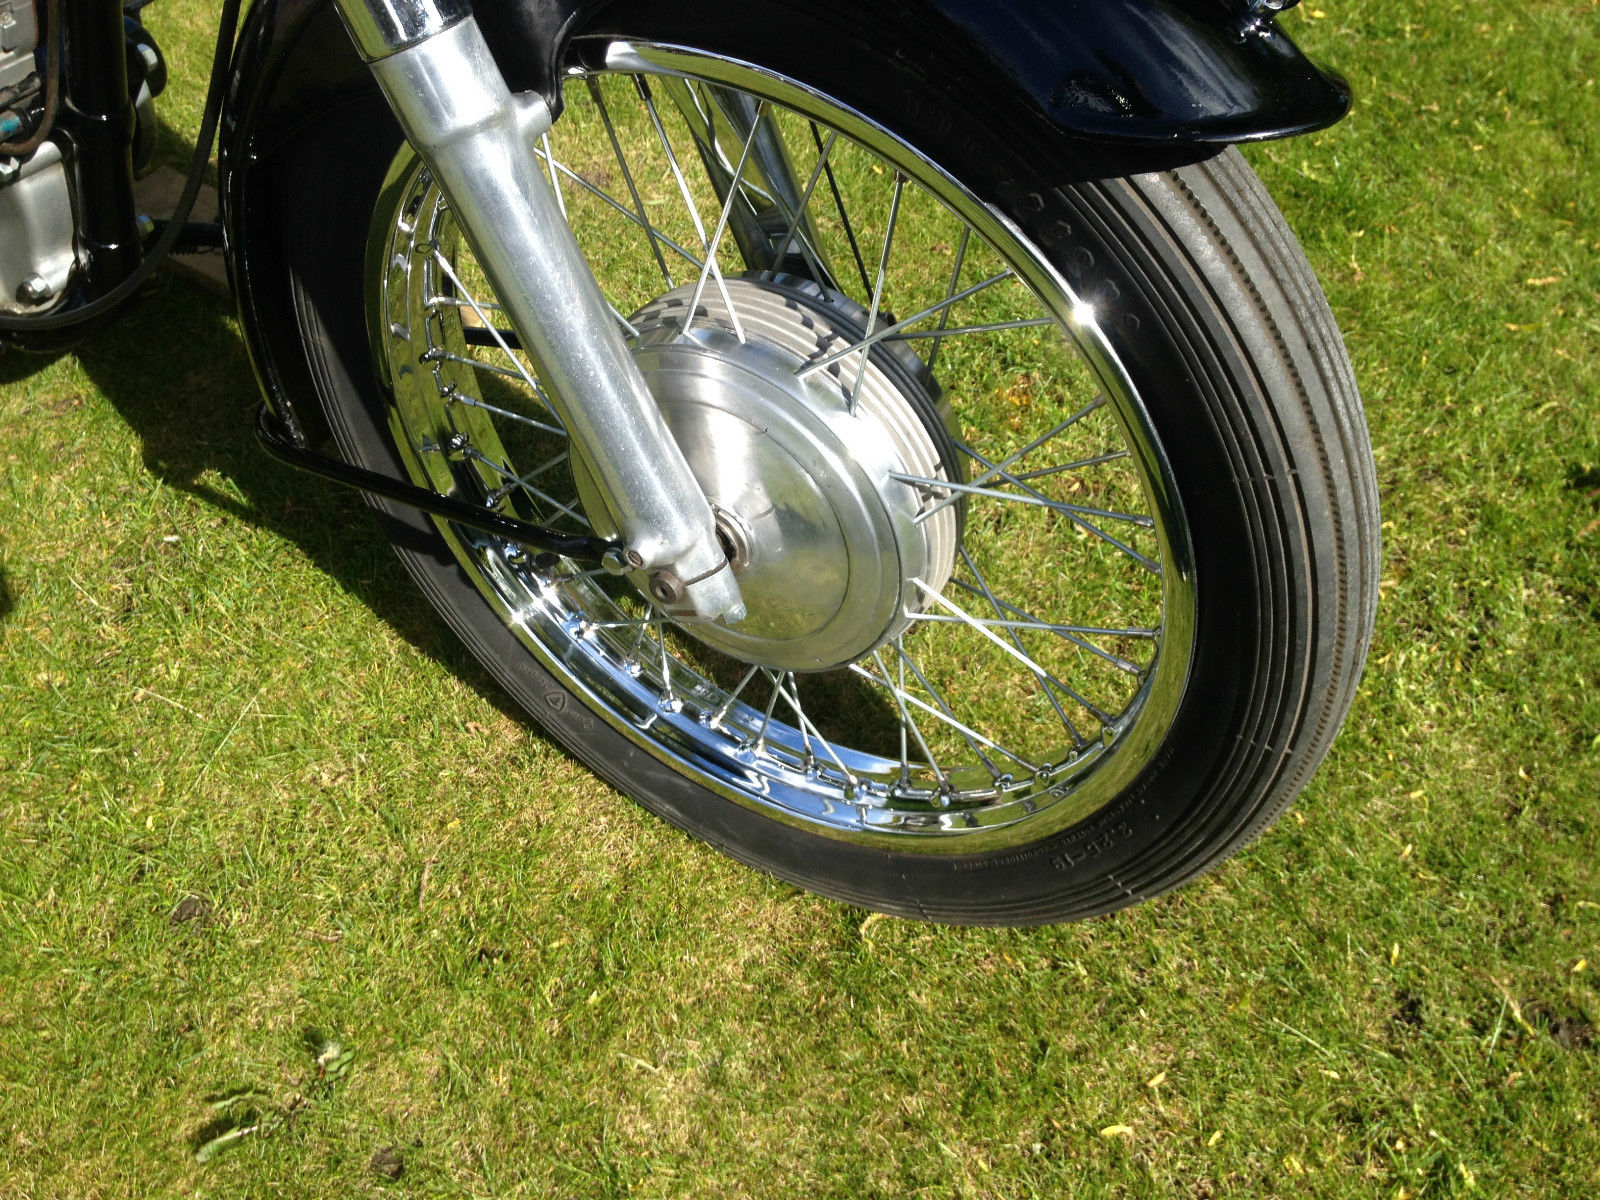 AJS 16MS - 1957 - Front Wheel, Front Forks, Wheel Hub and Tyre.